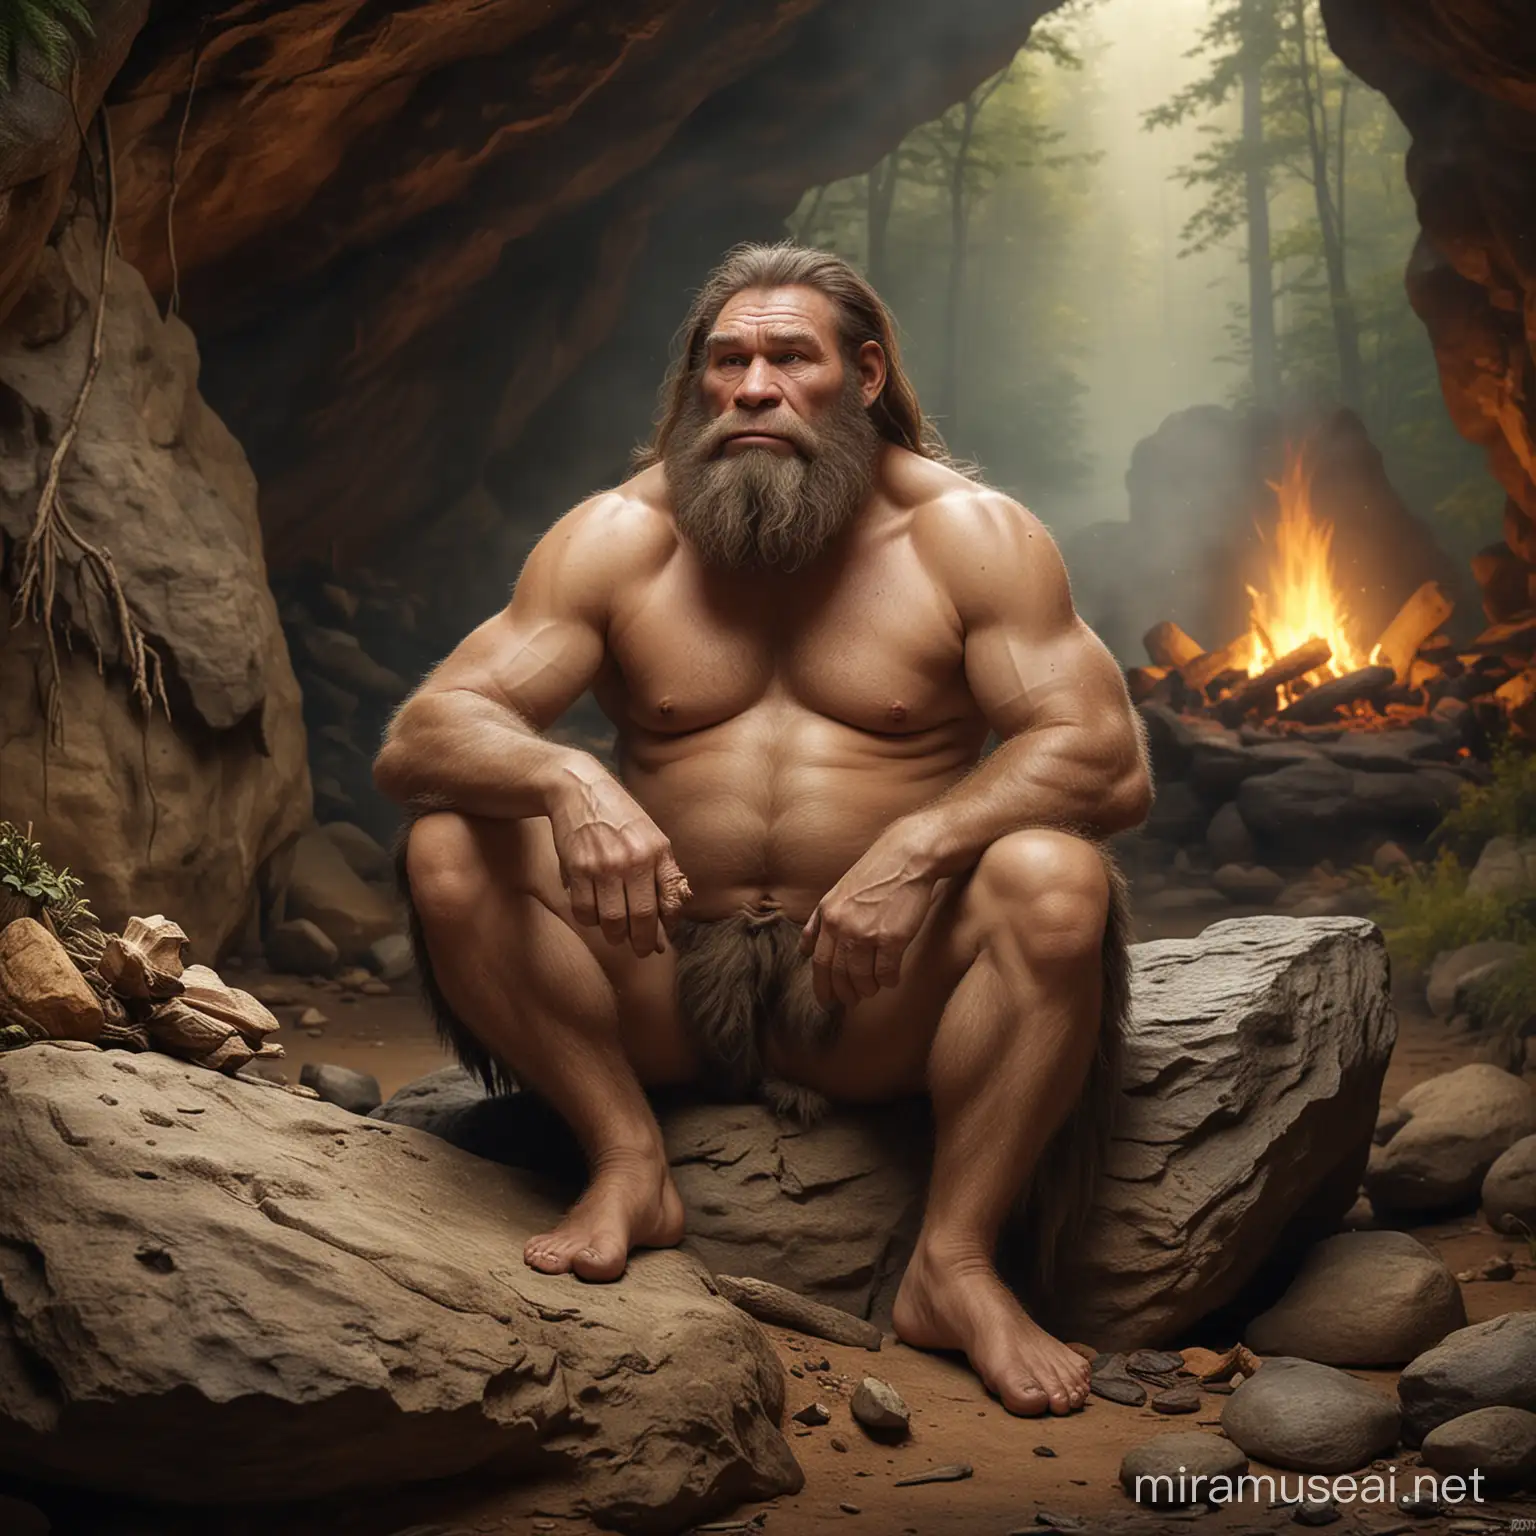 Neanderthal Sitting by Campfire in Forest Cave